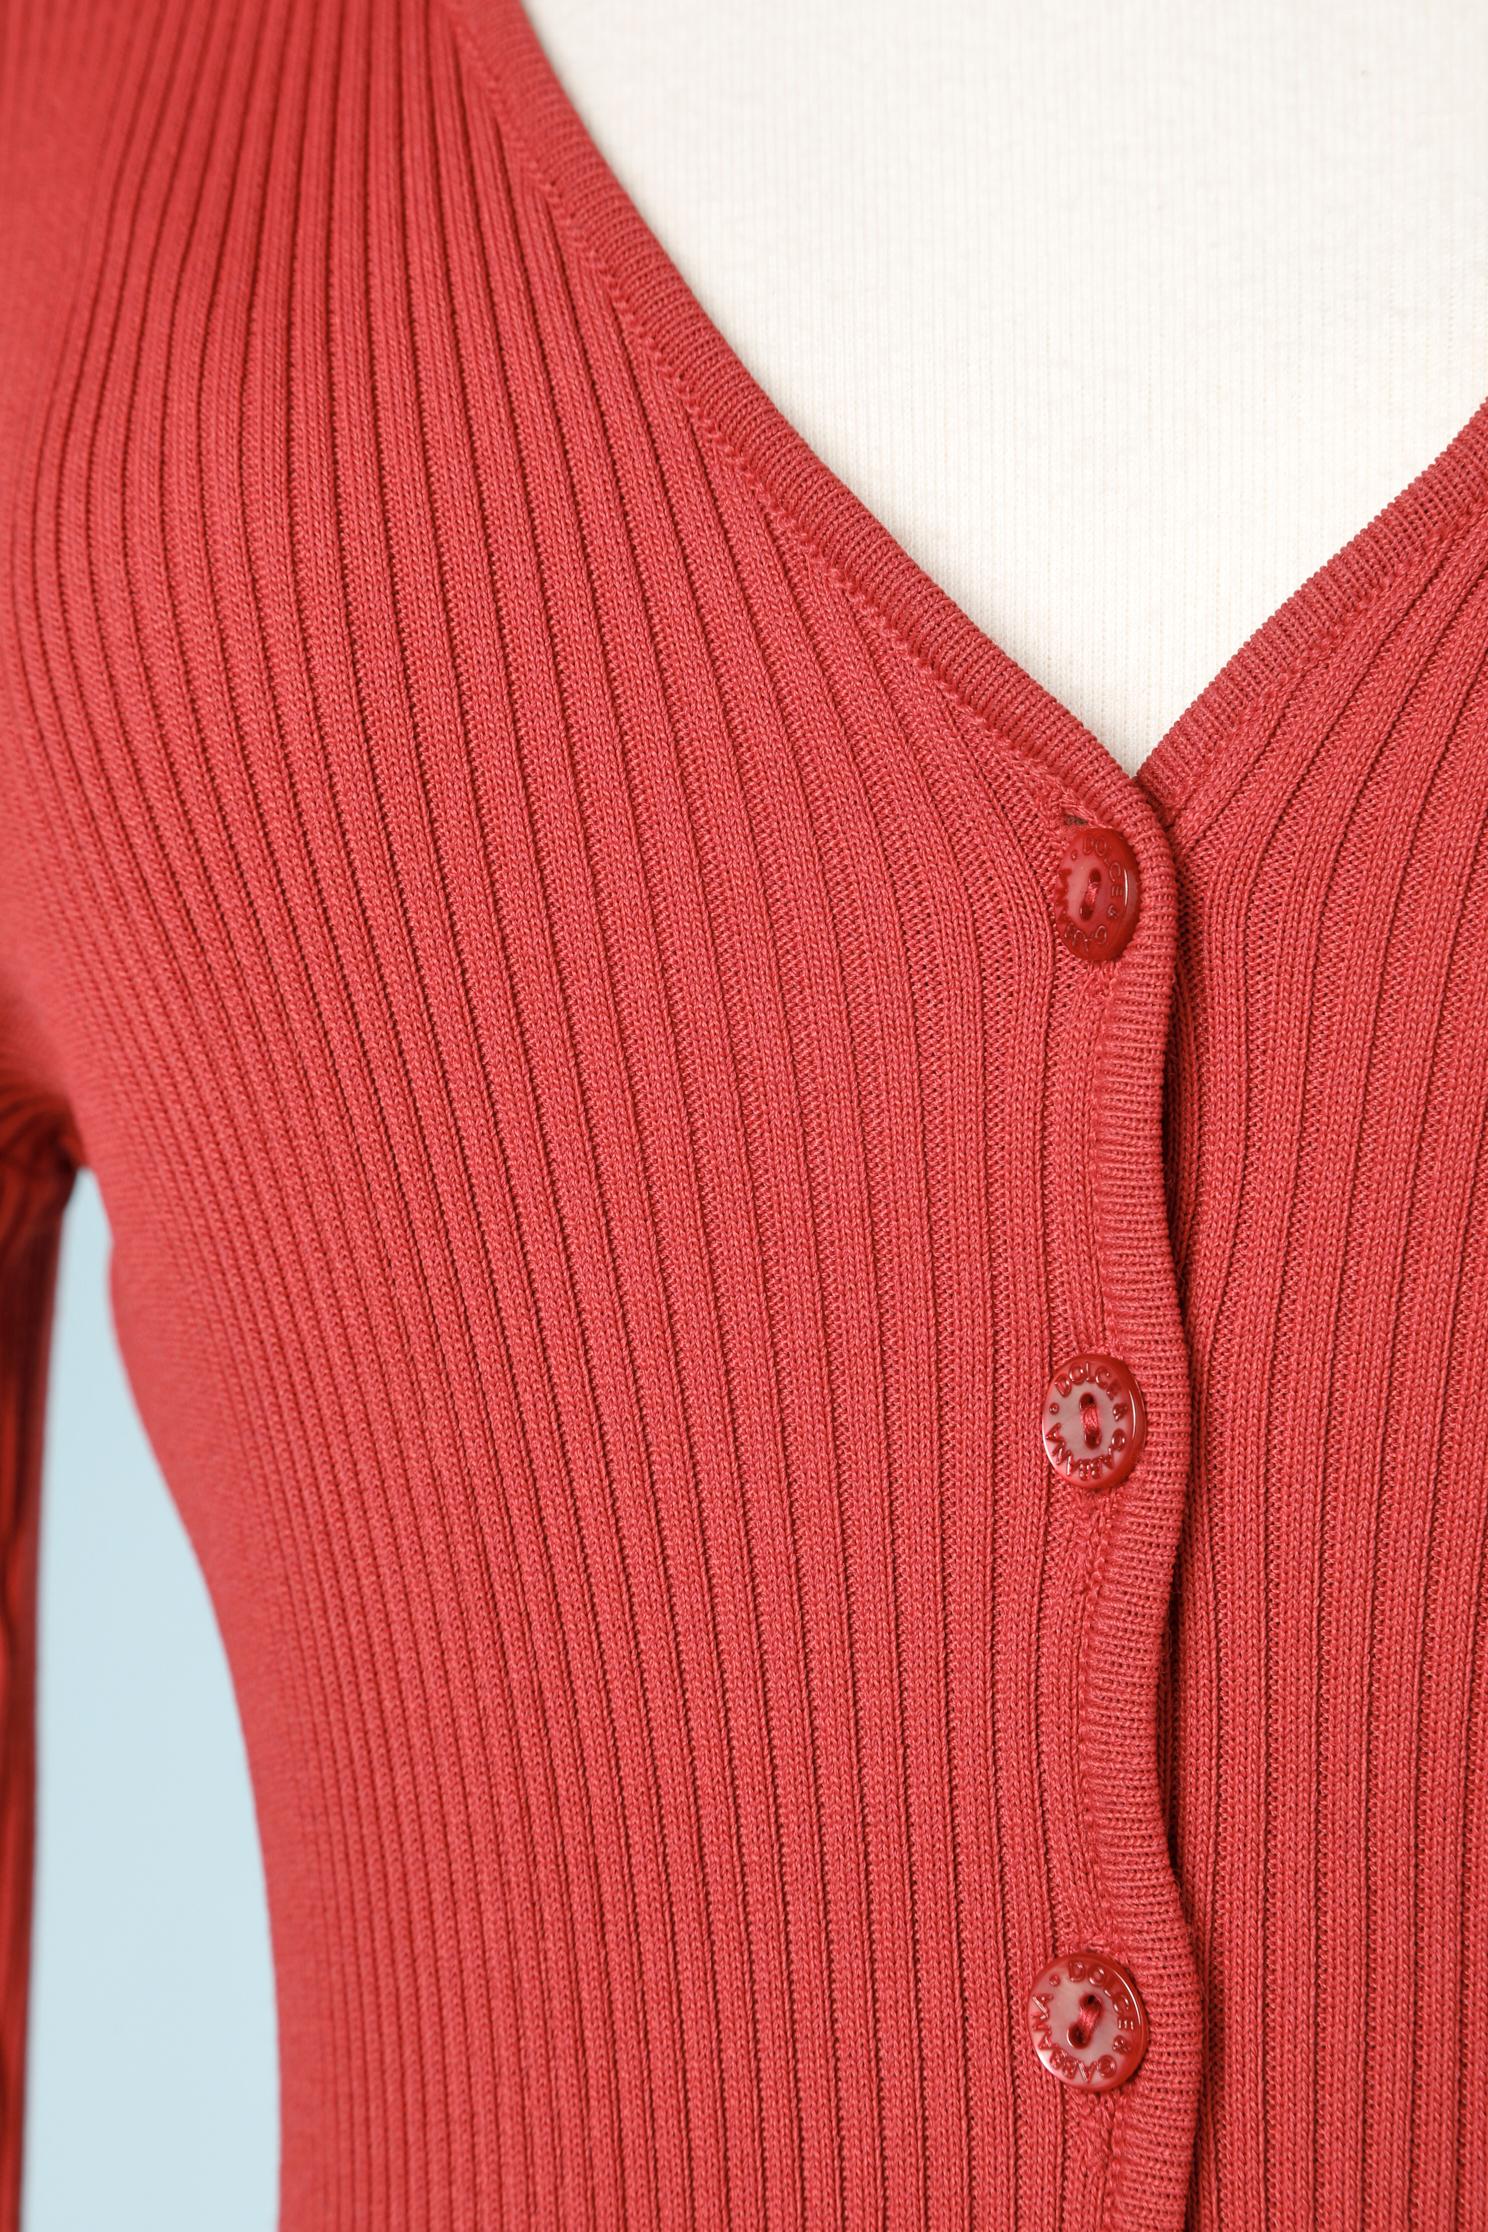 Red knit cardigan with branded buttons.
SIZE M